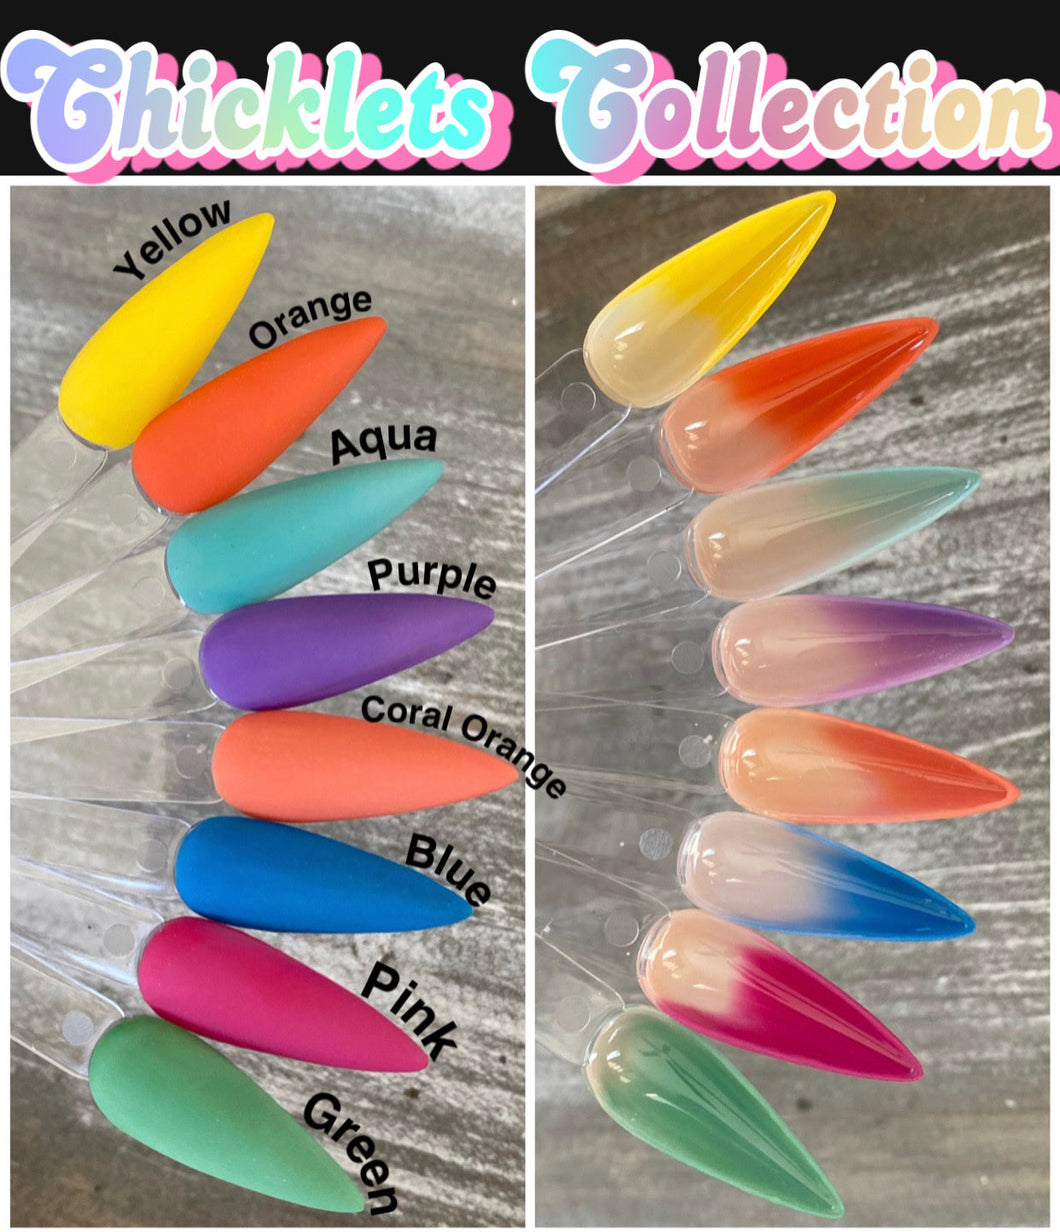 Chicklets Collection